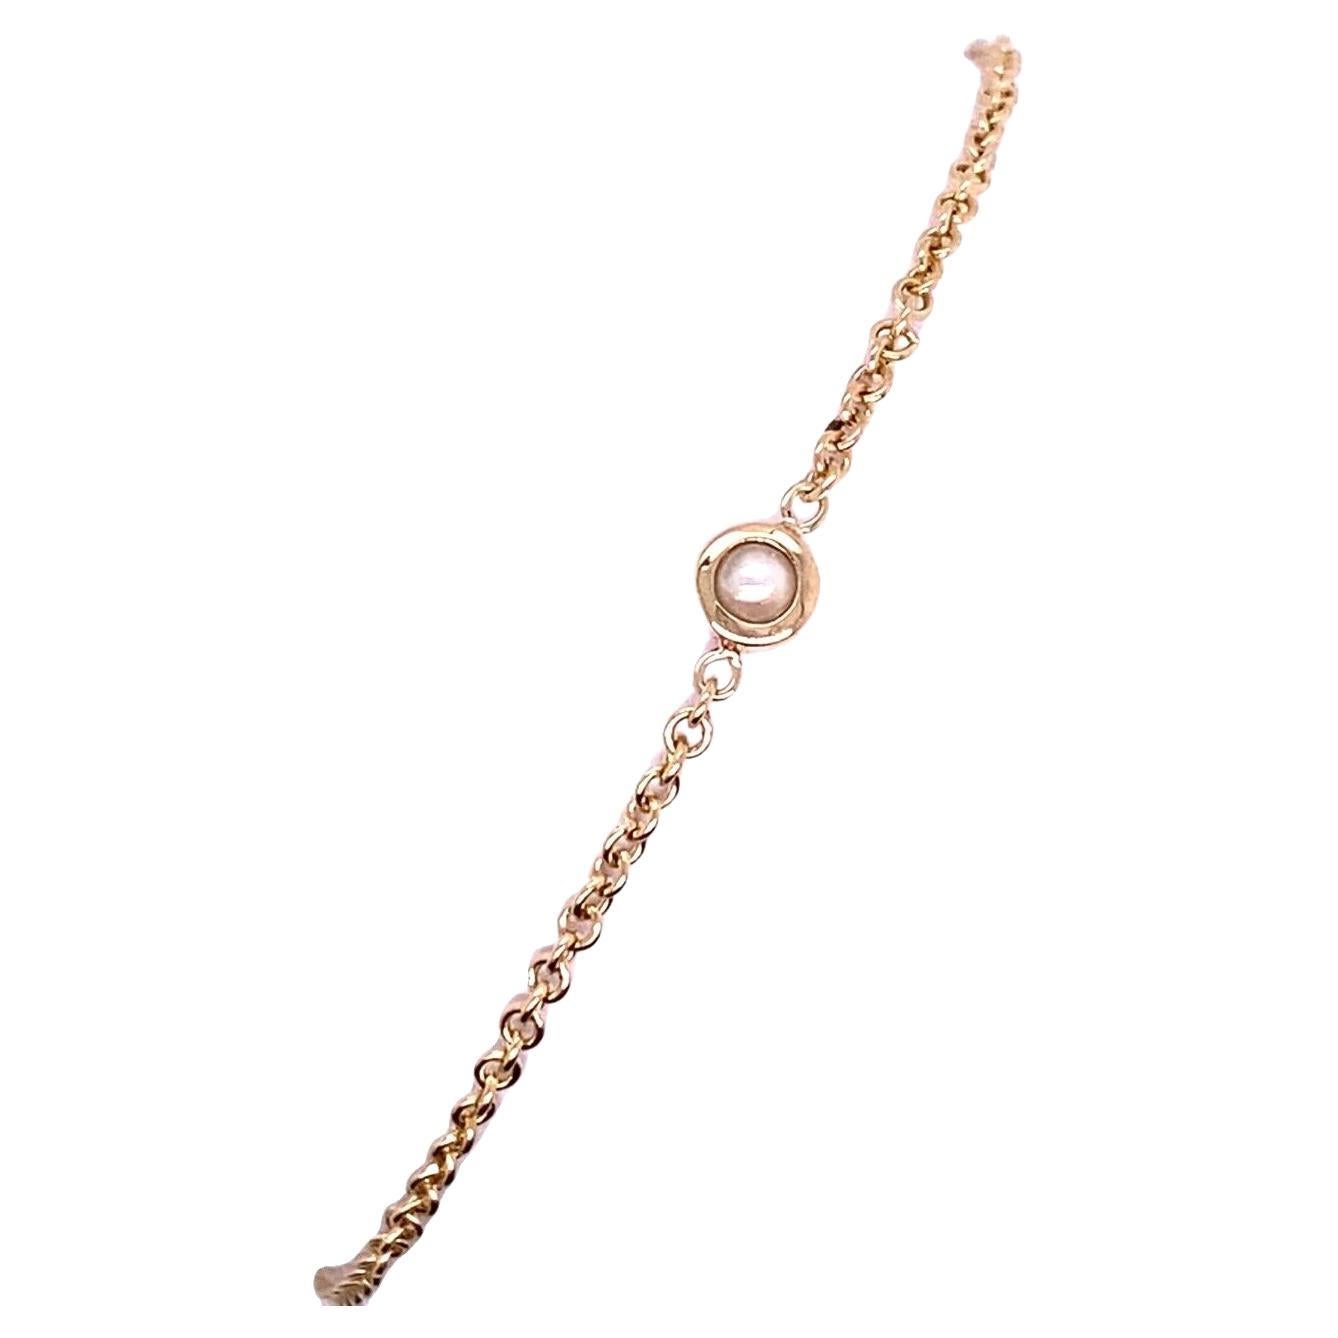 June Birthstone Bracelet Set with 0.09ct Round Pearl in 9ct Yellow Gold